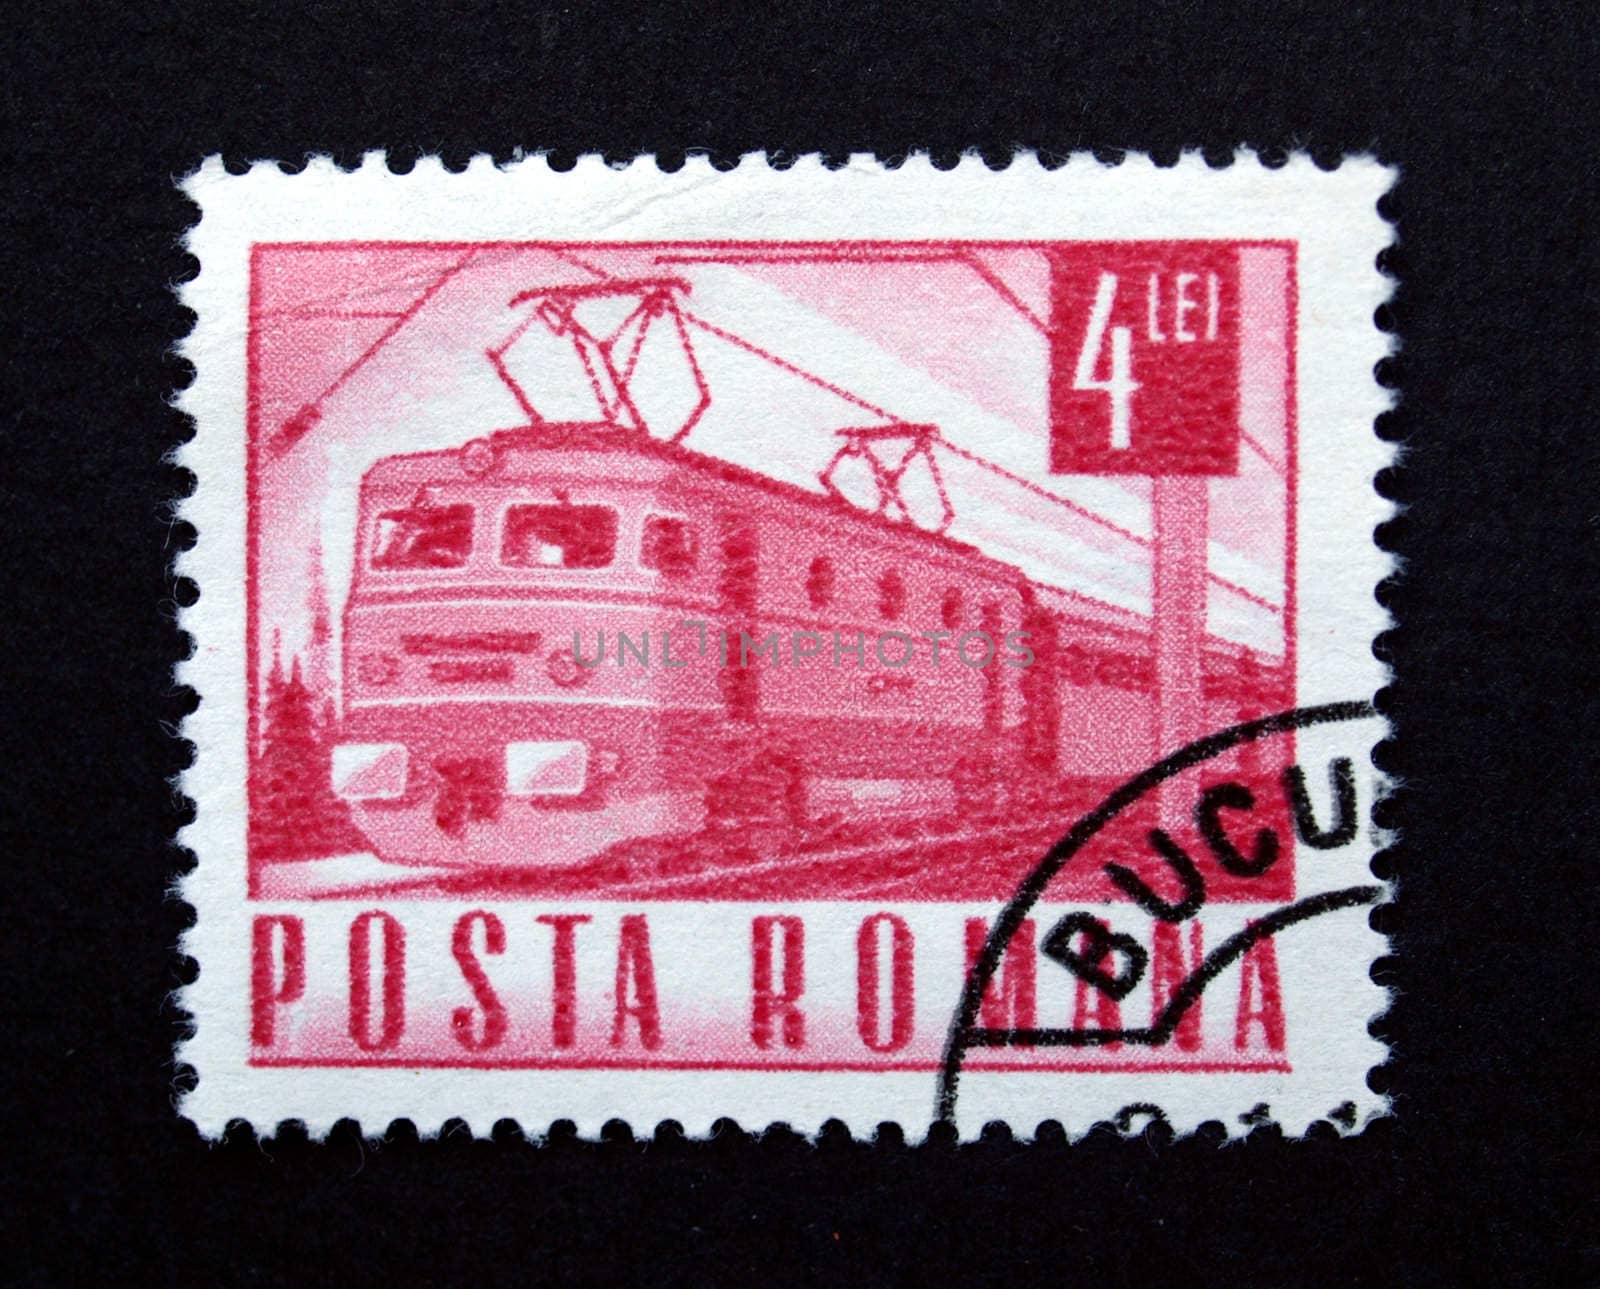 Romania stamp with train by paolo77